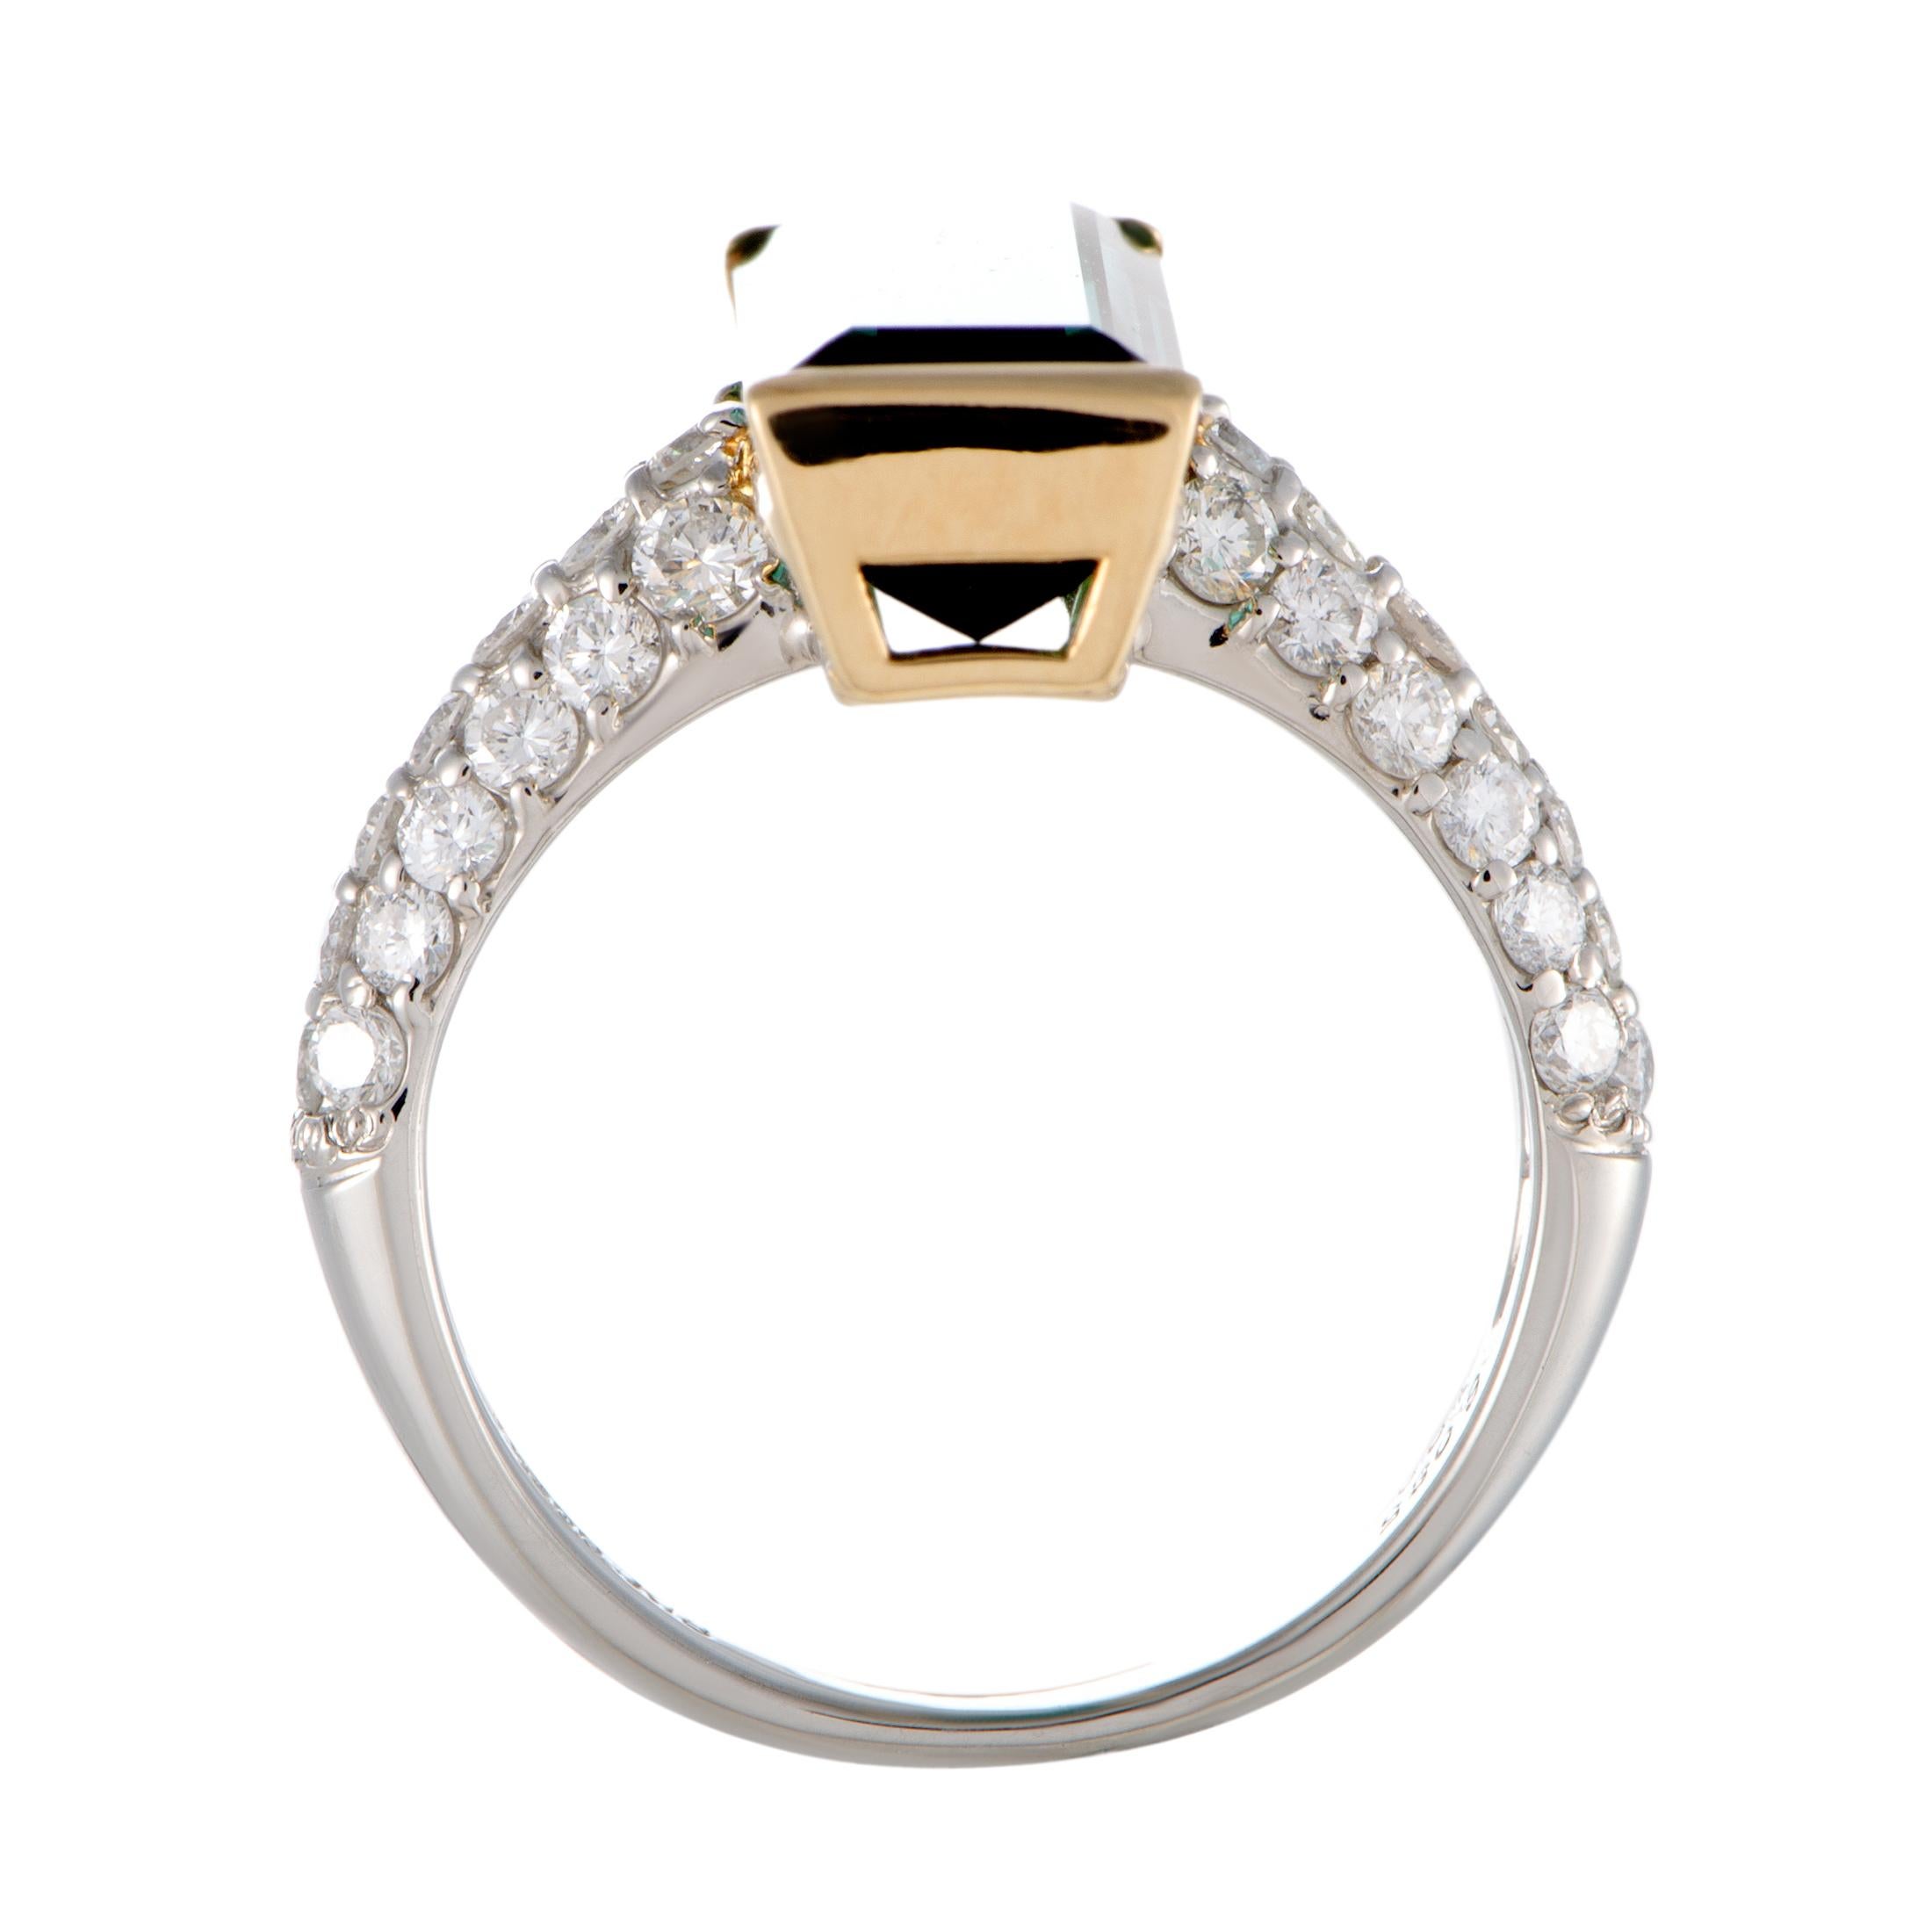 Wonderfully crafted from a luxurious blend of platinum and 18K yellow gold and lavishly decorated with resplendent gems, this superb ring boasts a stunningly prestigious appeal. The ring is set with scintillating diamonds that amount to 1.00 carat